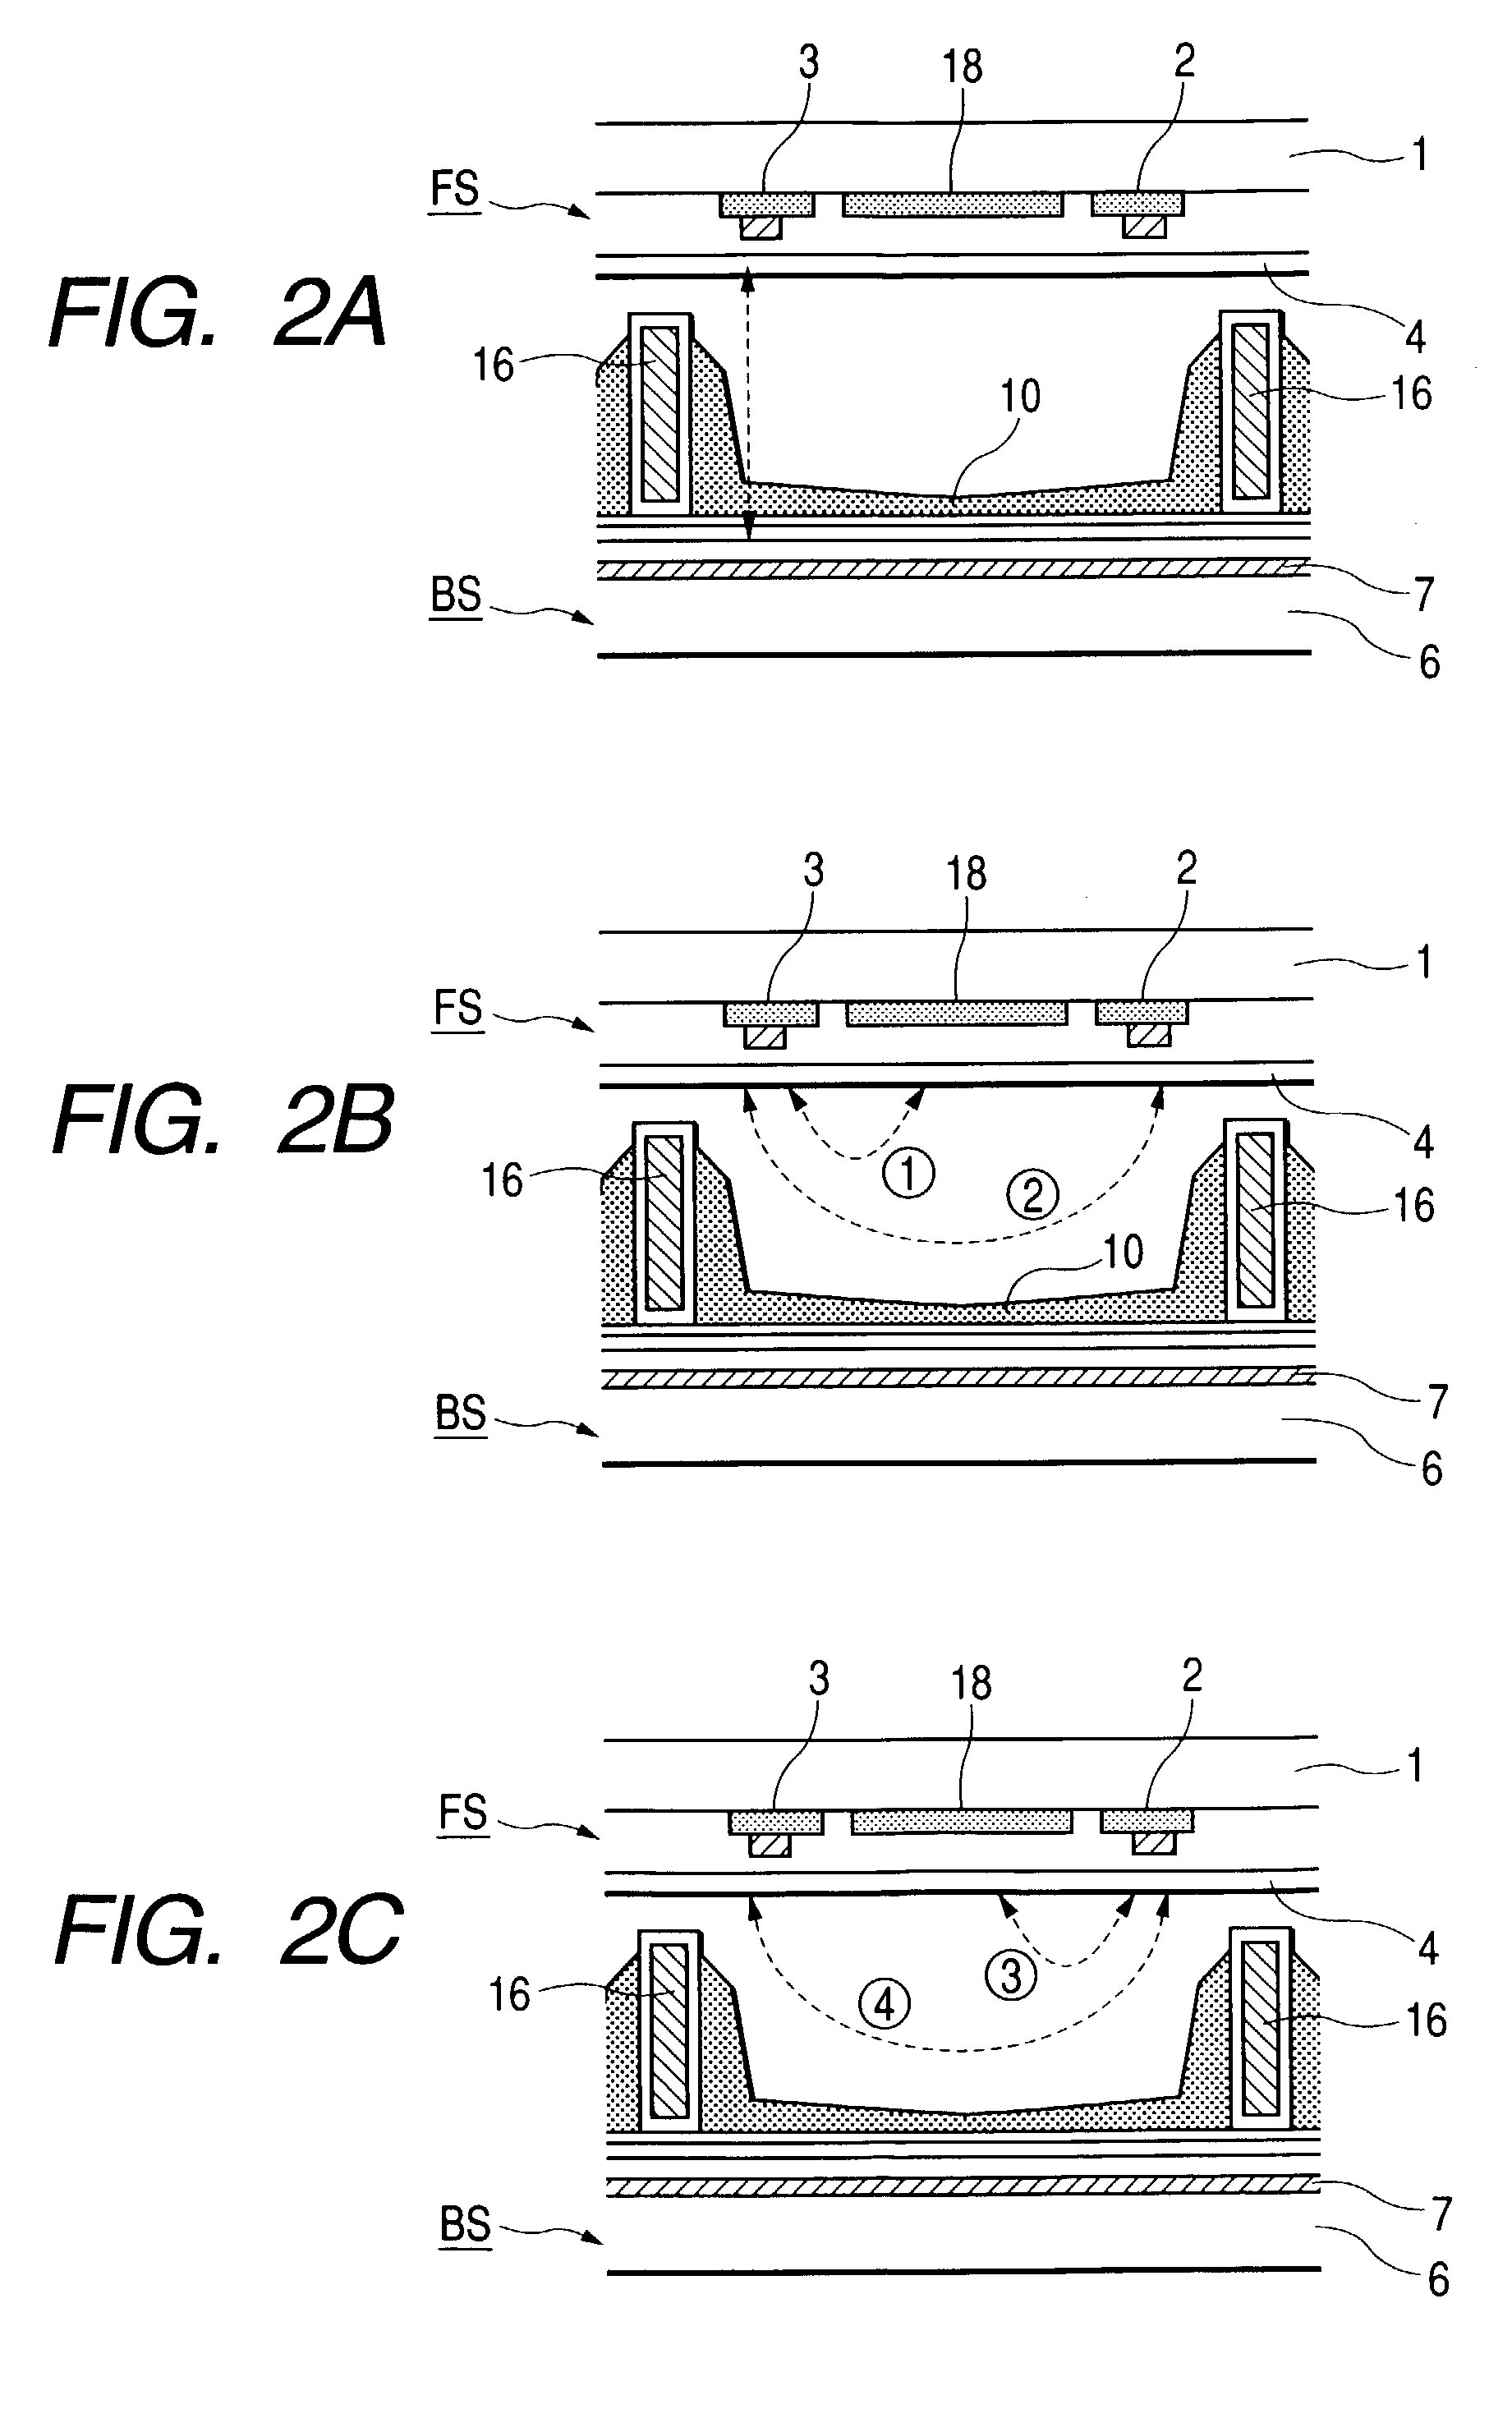 Plasma display panel and display employing the same having transparent intermediate electrodes and metal barrier ribs